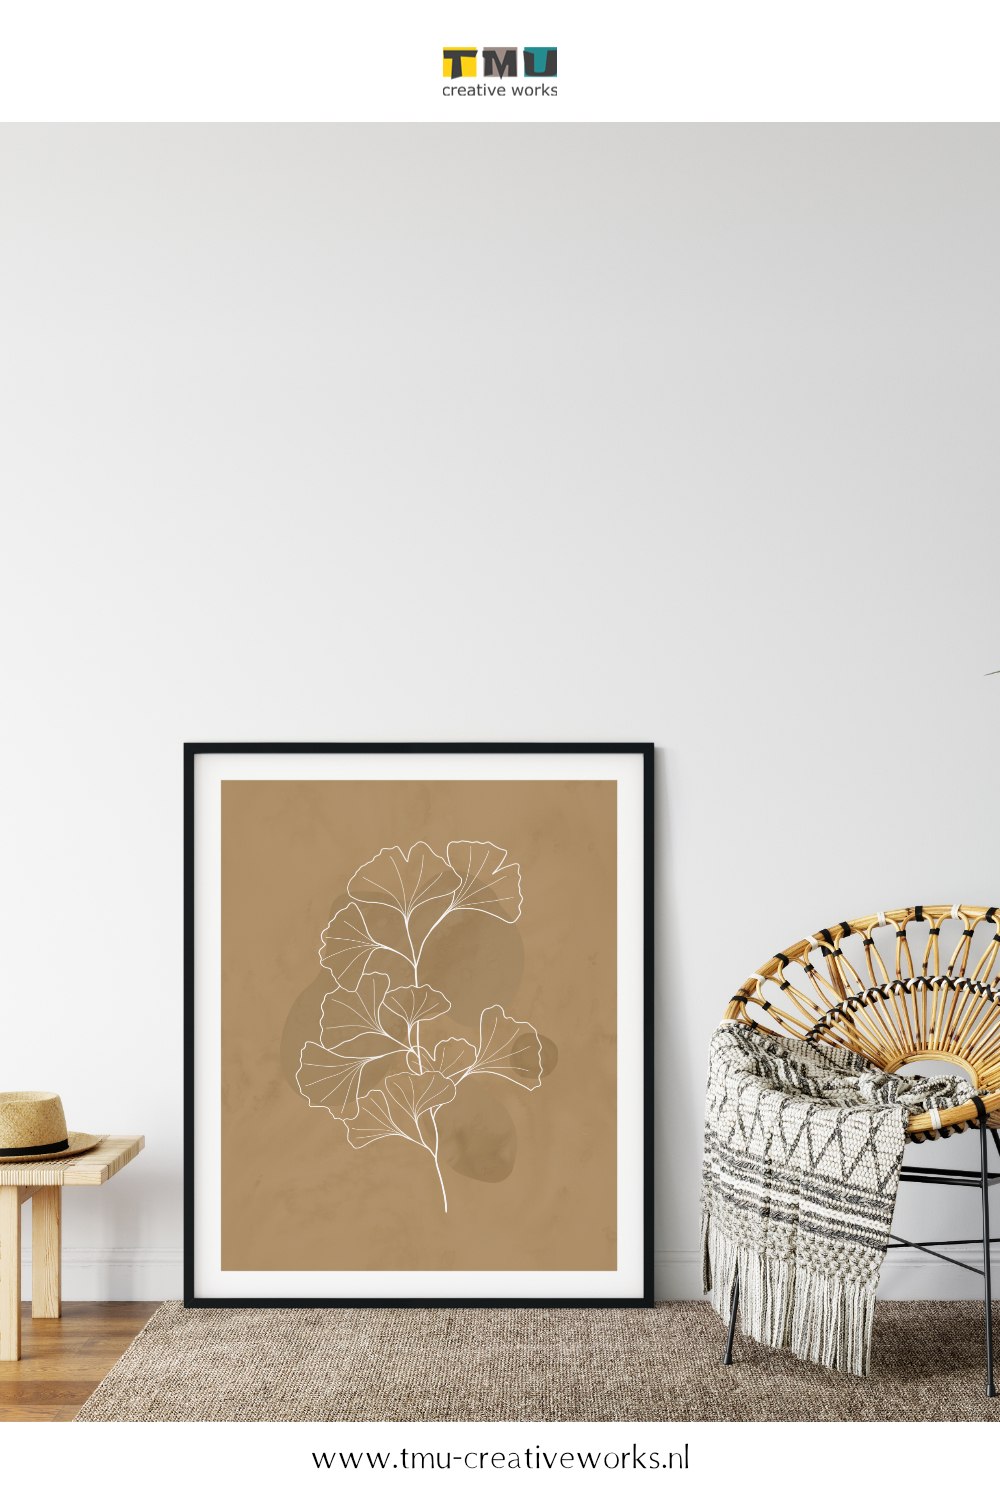 abstract and minimalist art in warm living room colors - mockup 2